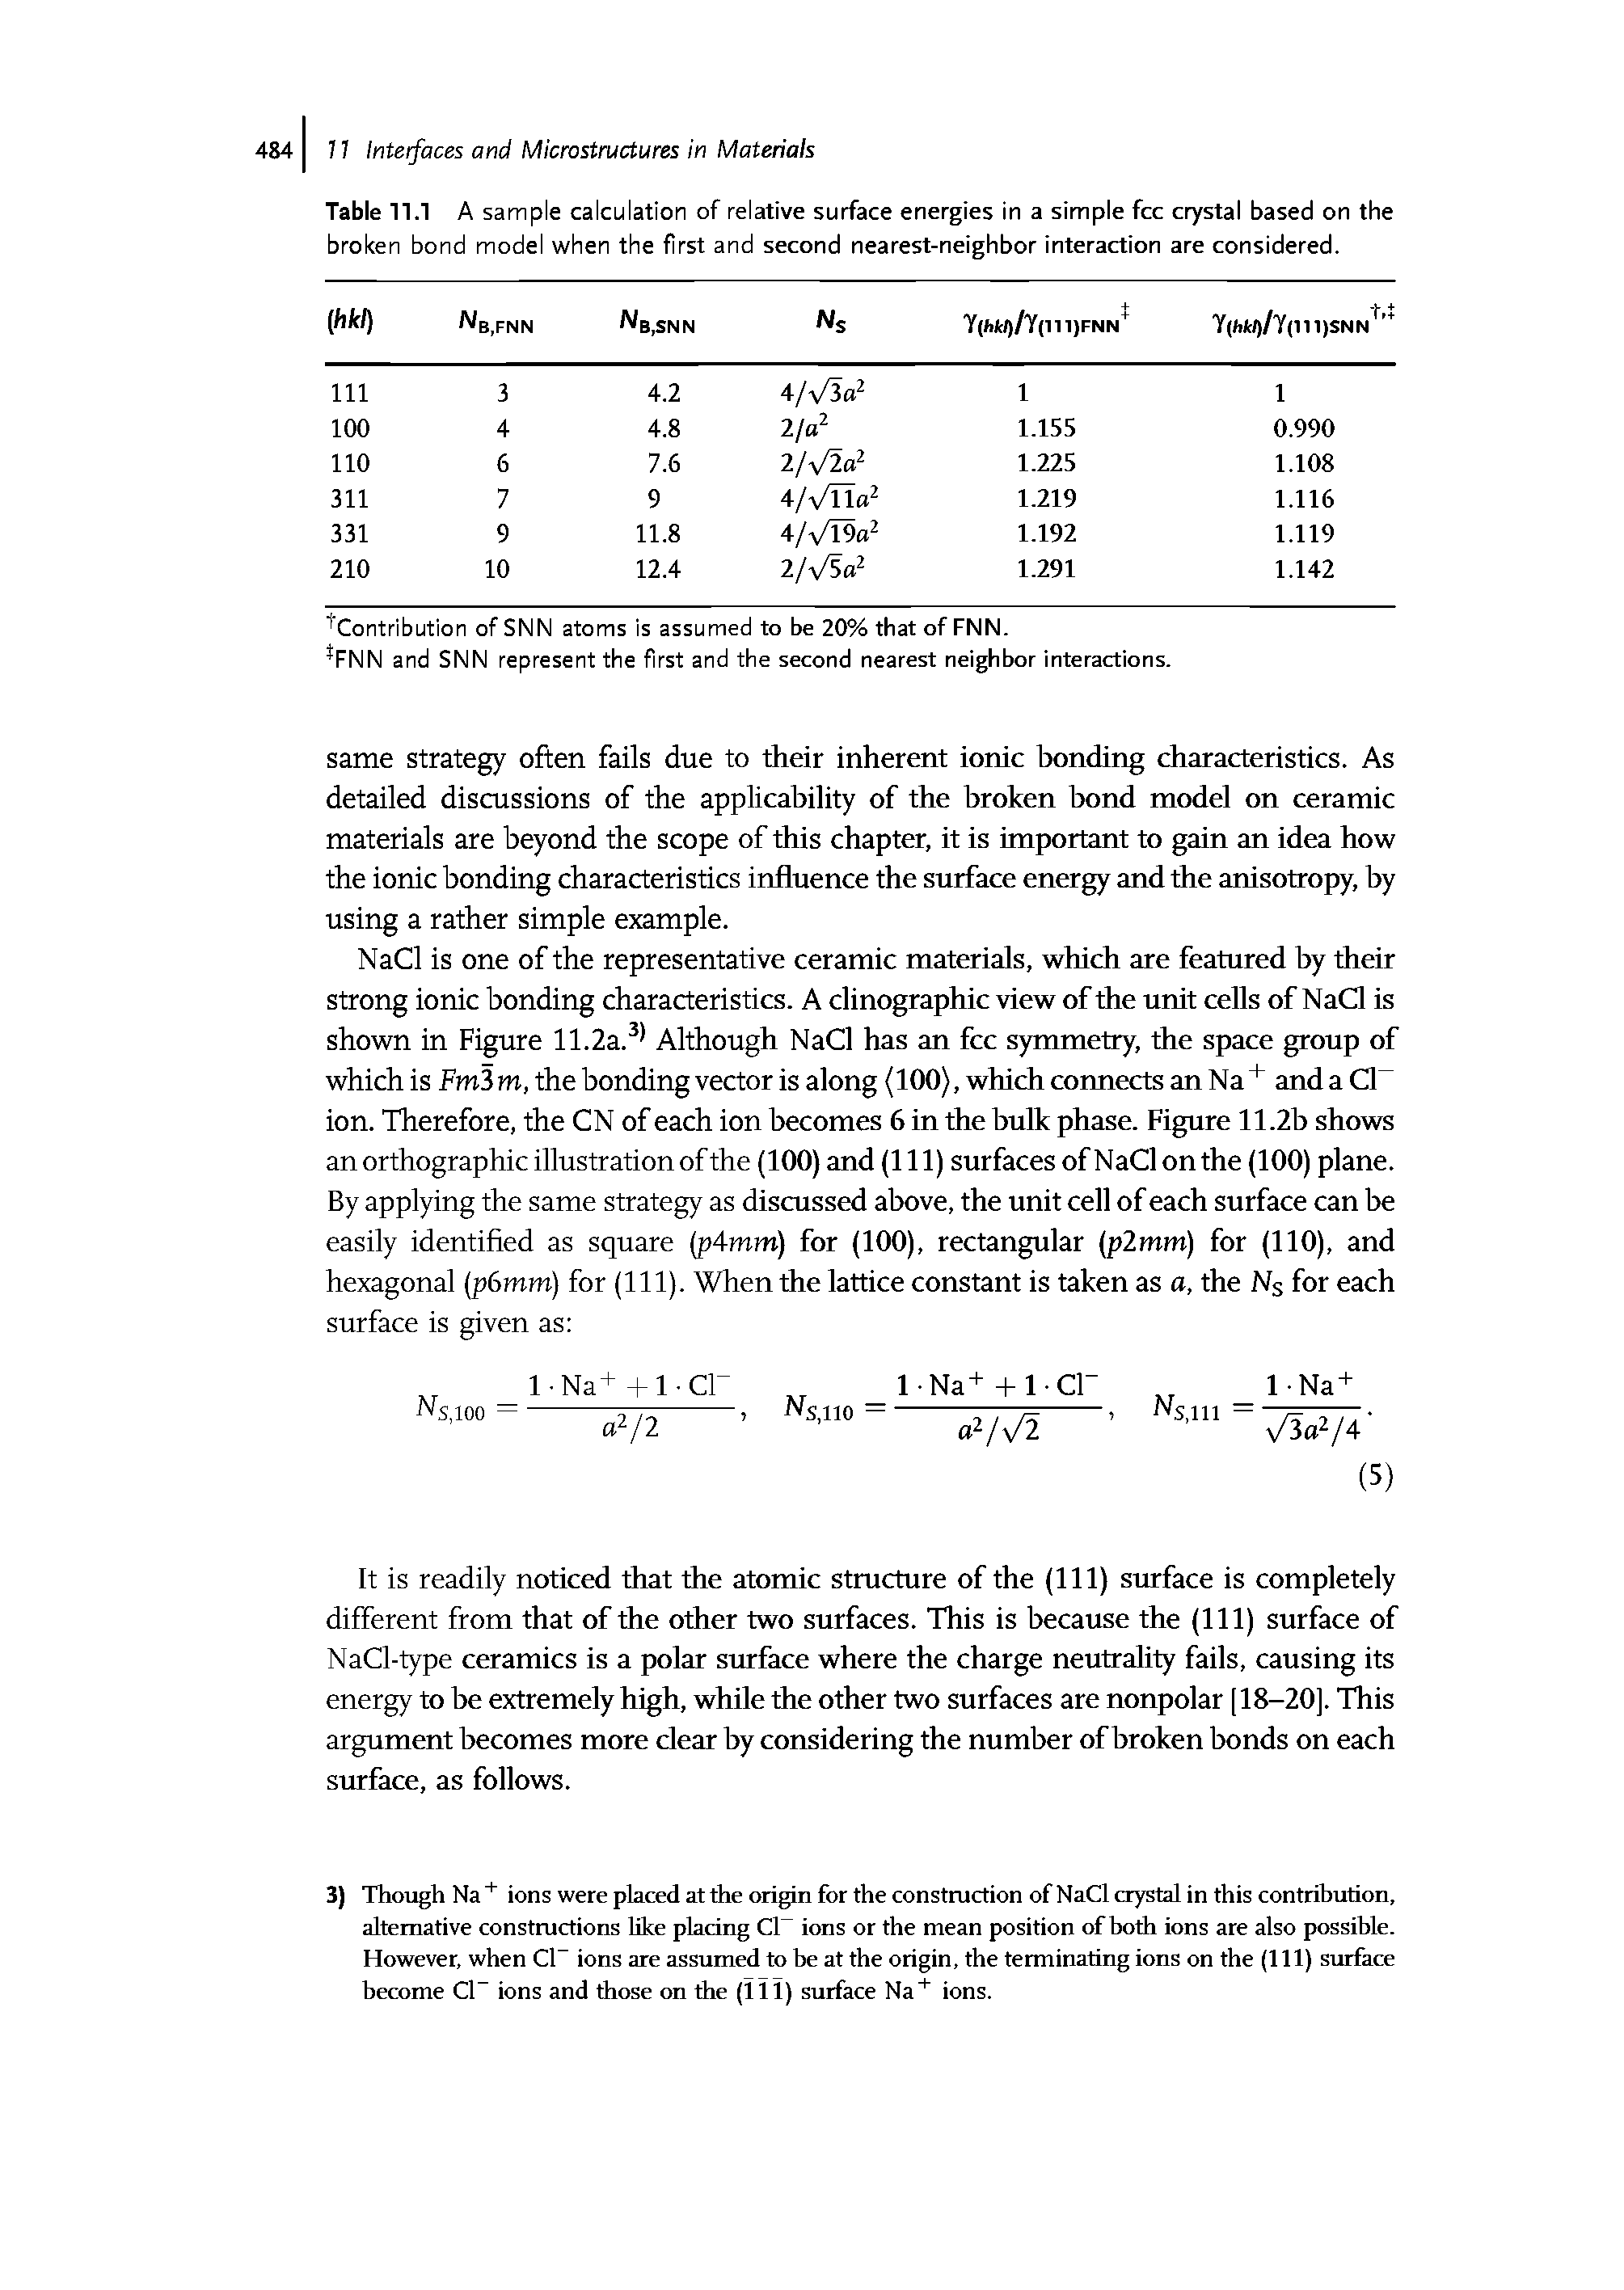 Table 11.1 A sample calculation of relative surface energies in a simple fee crystal based on the broken bond model when the first and second nearest-neighbor interaction are considered.